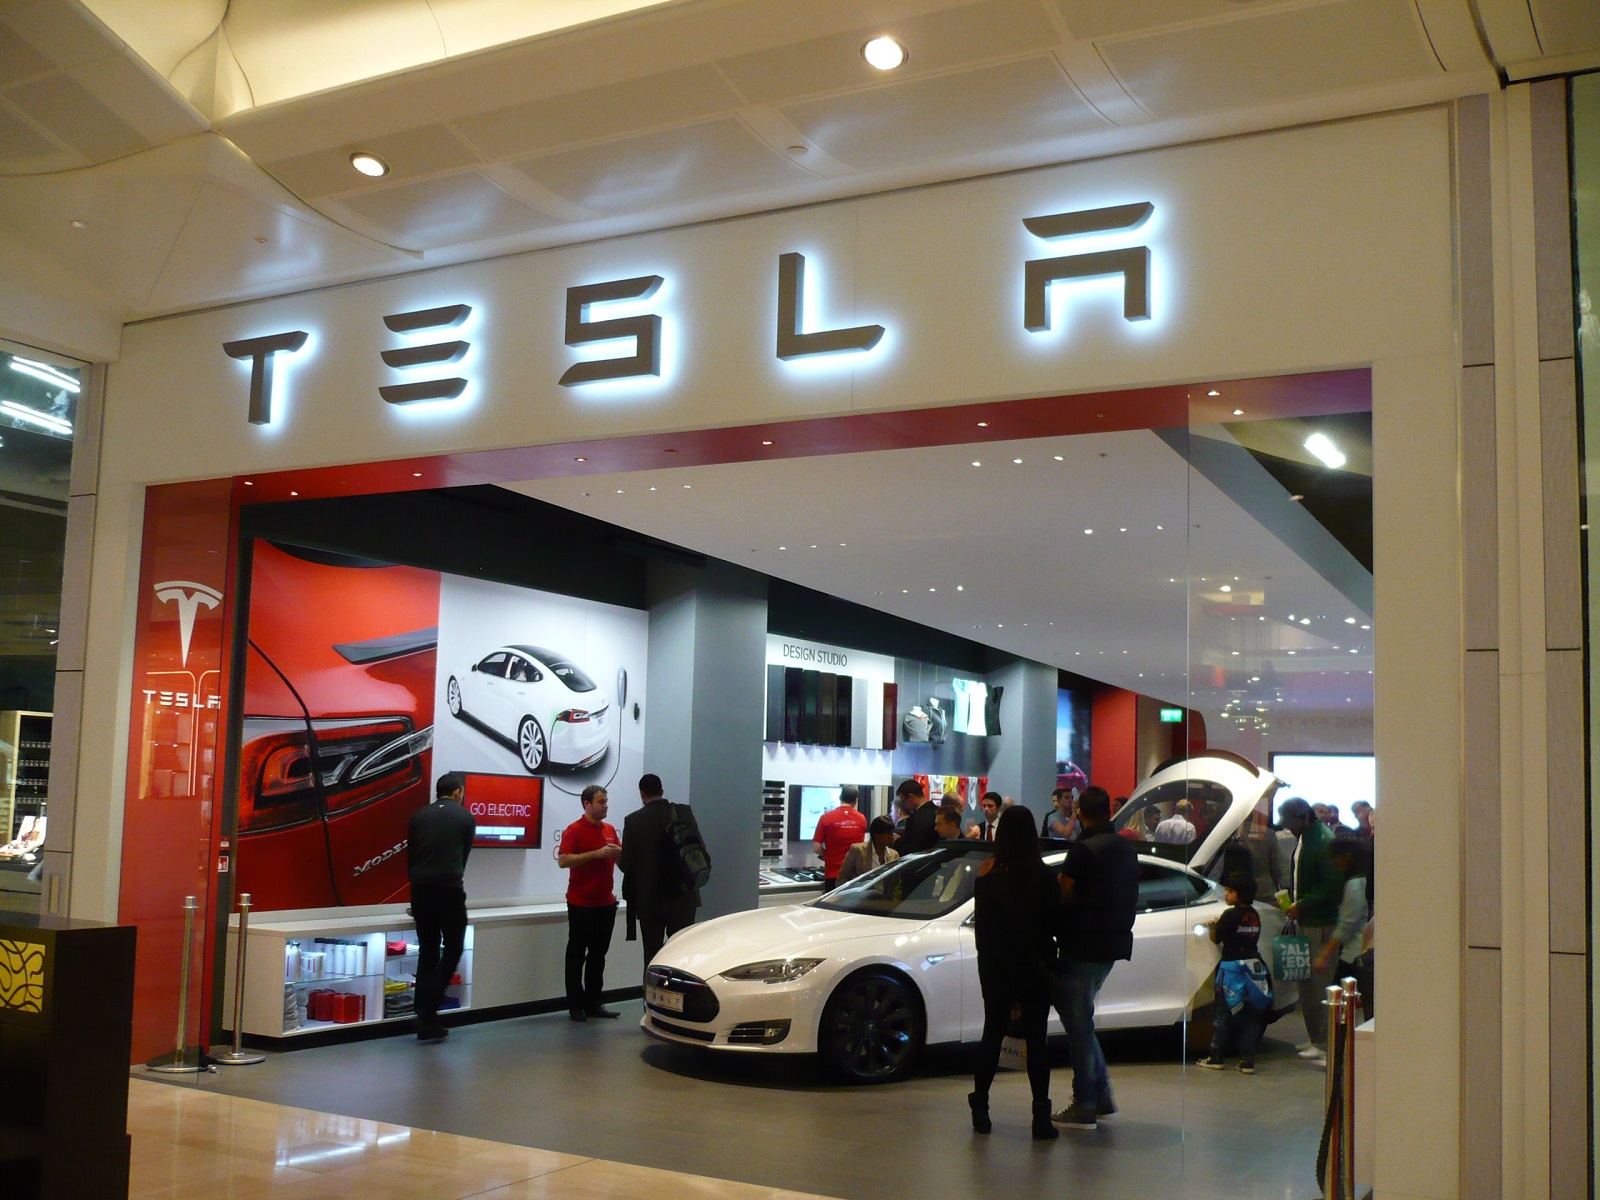 Please feel free to explore our website to see our extensive inventory of new and used cars and suvs. Elon Musk Opens New Tesla Store In London Mall: Live Photos